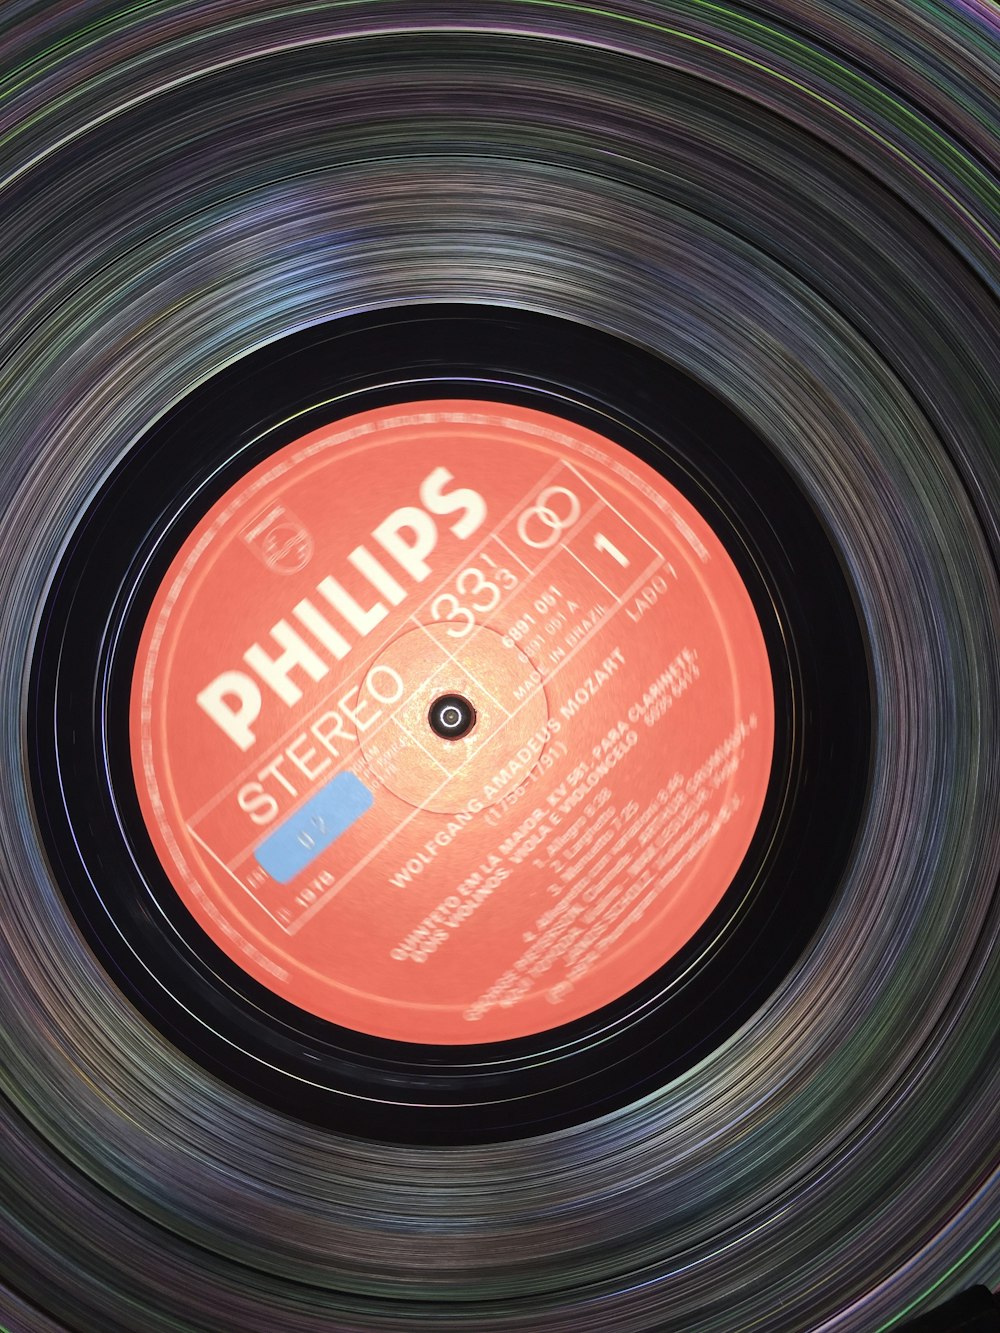 black and red Philips vinyl record